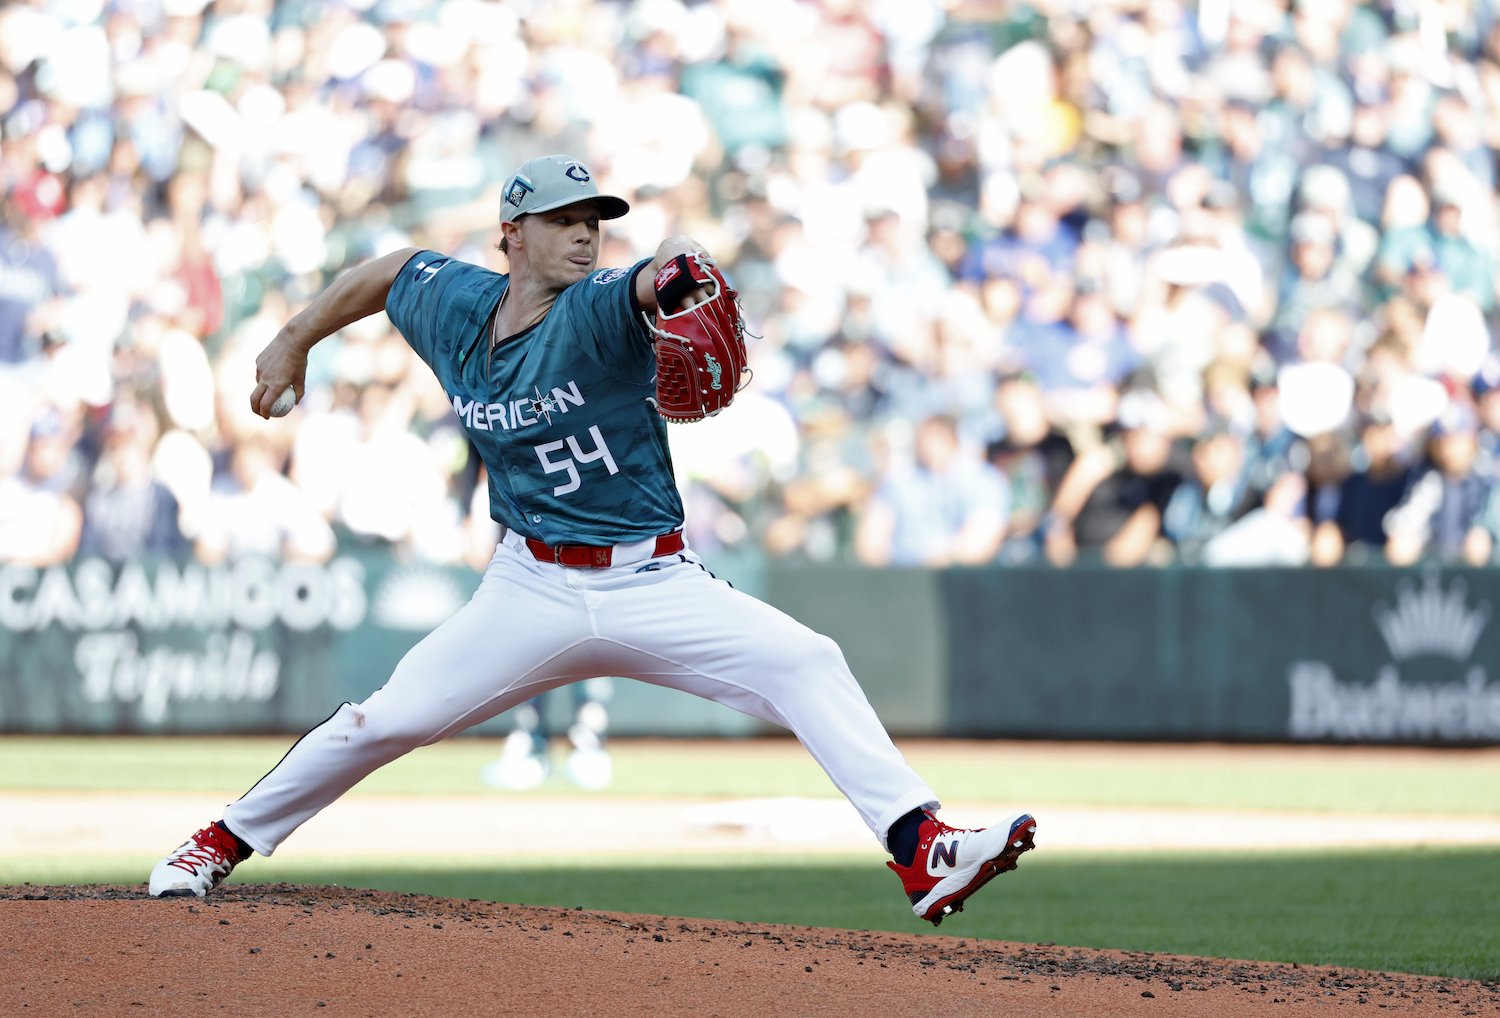 Minnesota Twins' Sonny Gray's Great Season Continues After Historic Start -  Fastball